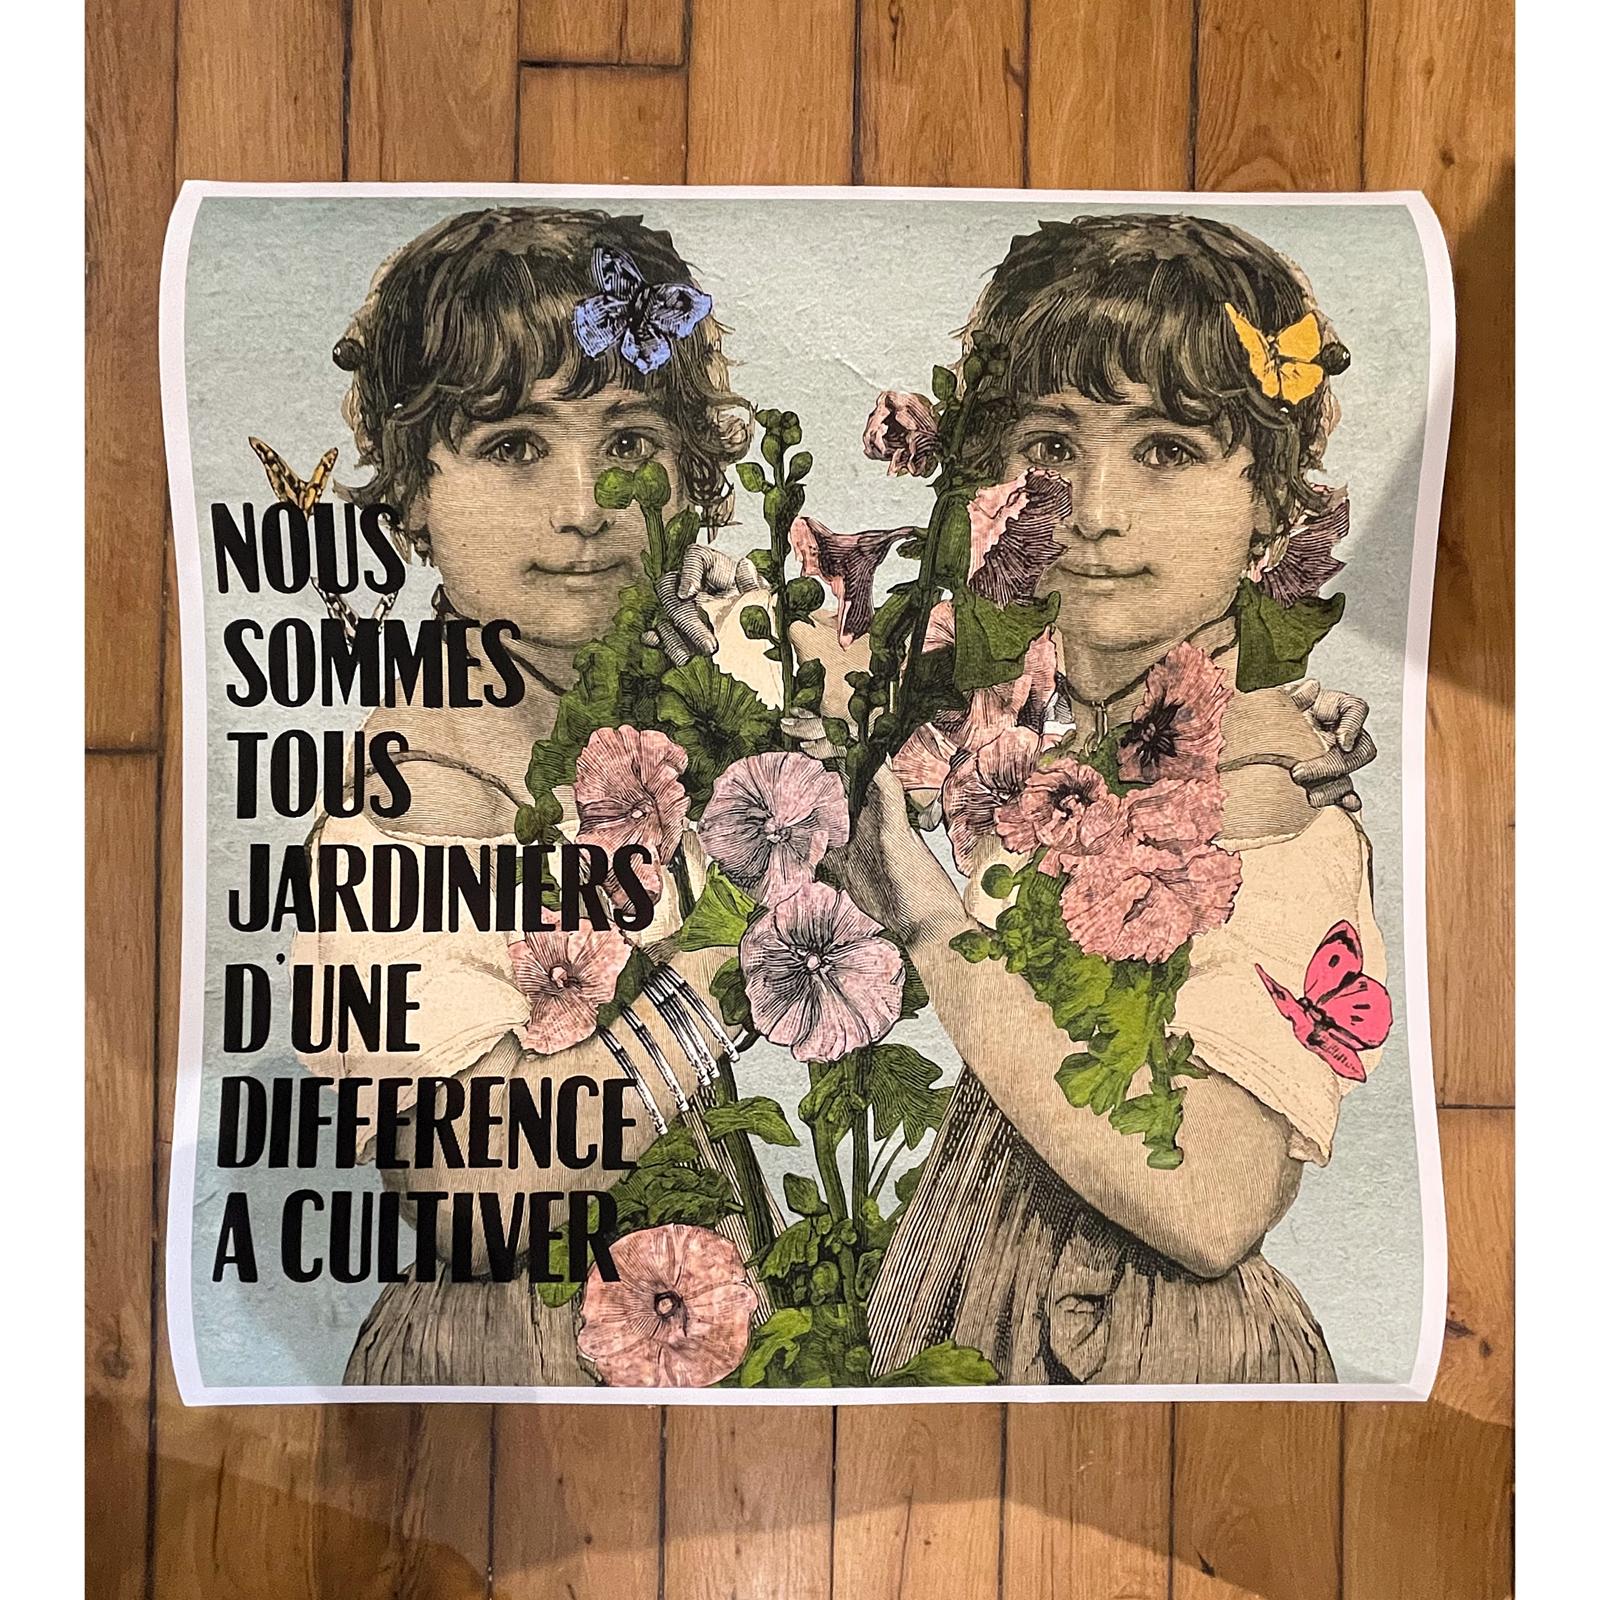 Madame Print Tous jardiniers d'une difference a cultiver